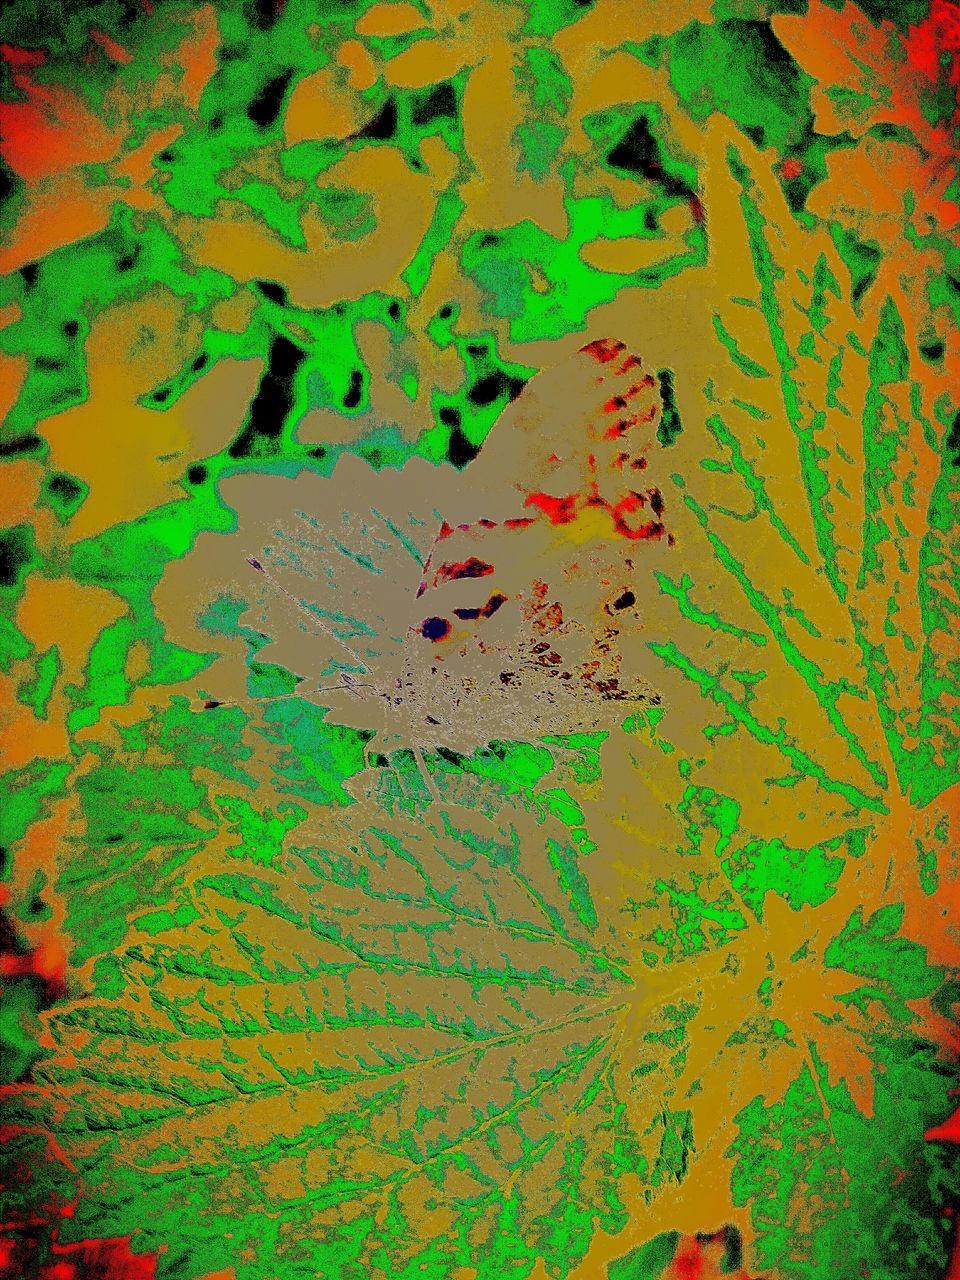 full frame, leaf, backgrounds, multi colored, pattern, no people, close-up, green, abstract, art, creativity, painting, textured, psychedelic art, indoors, flower